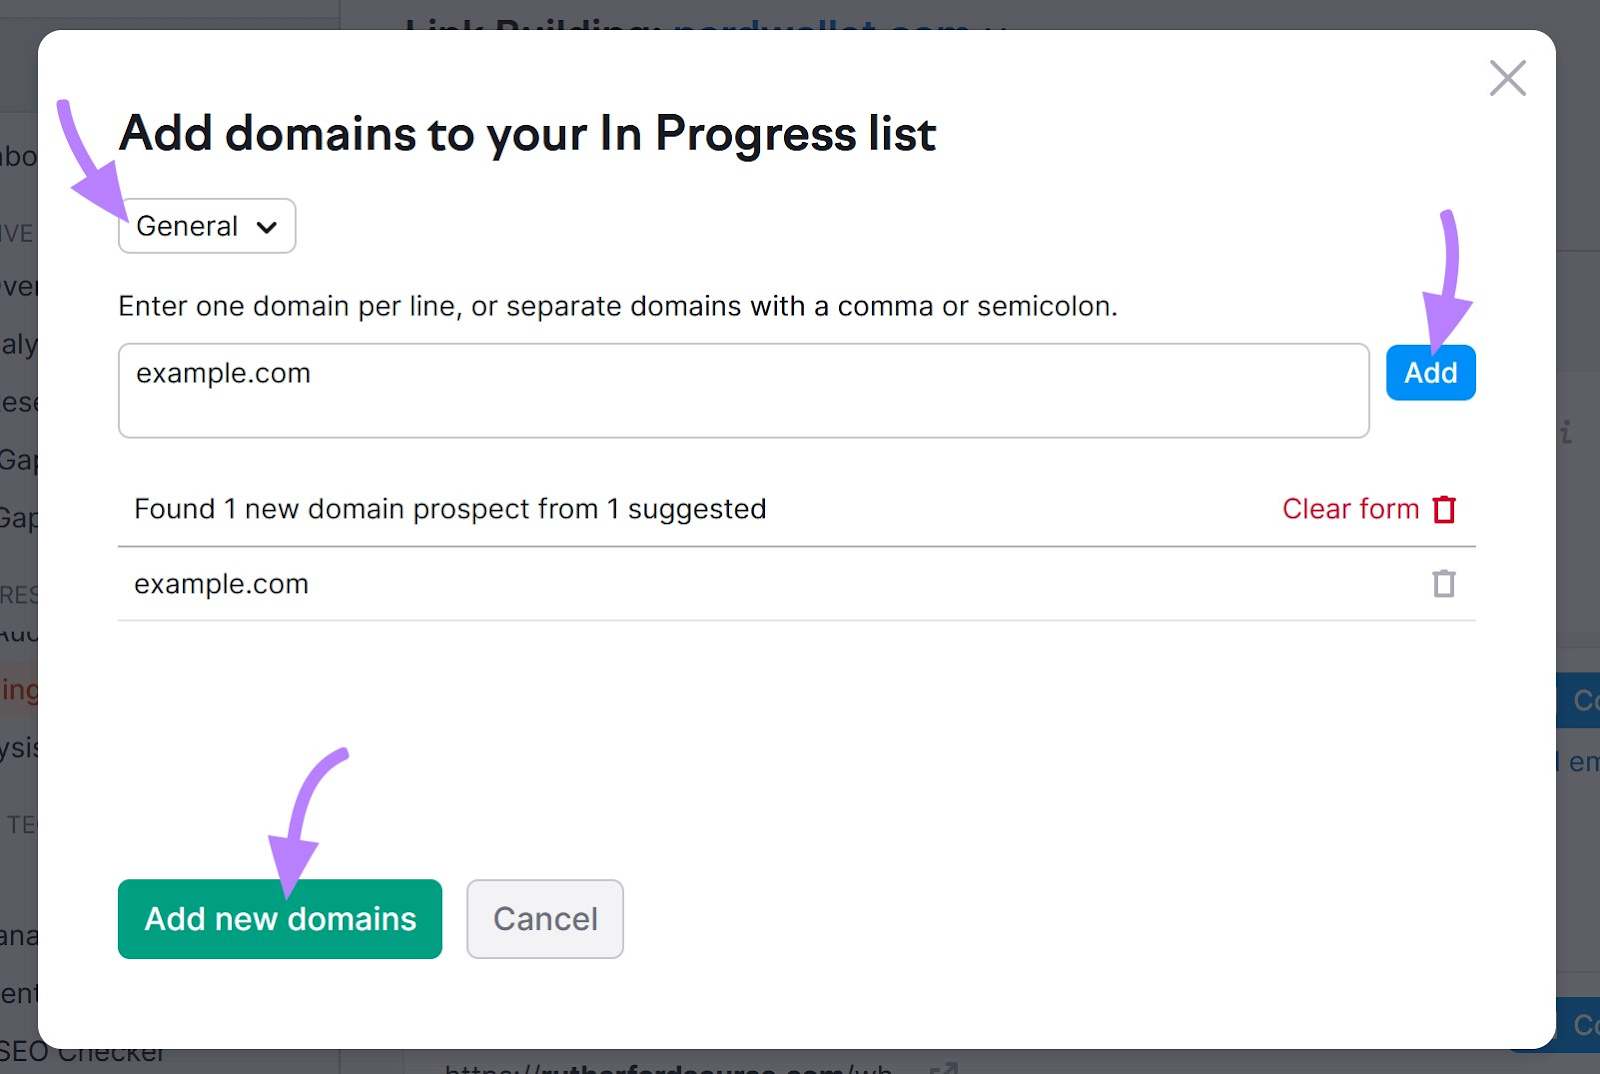 "Add domains to your In Progress list" page